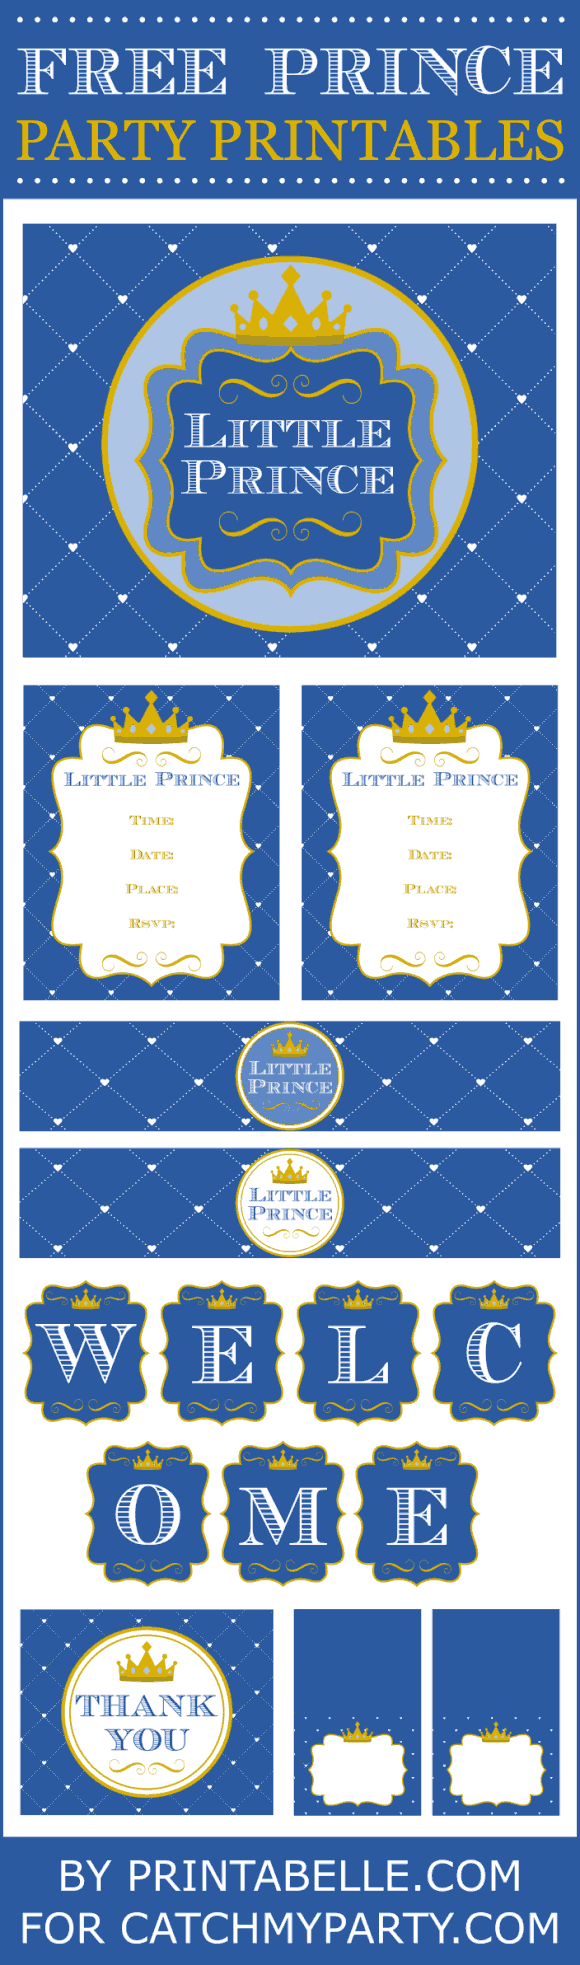 Free Prince Party Printables